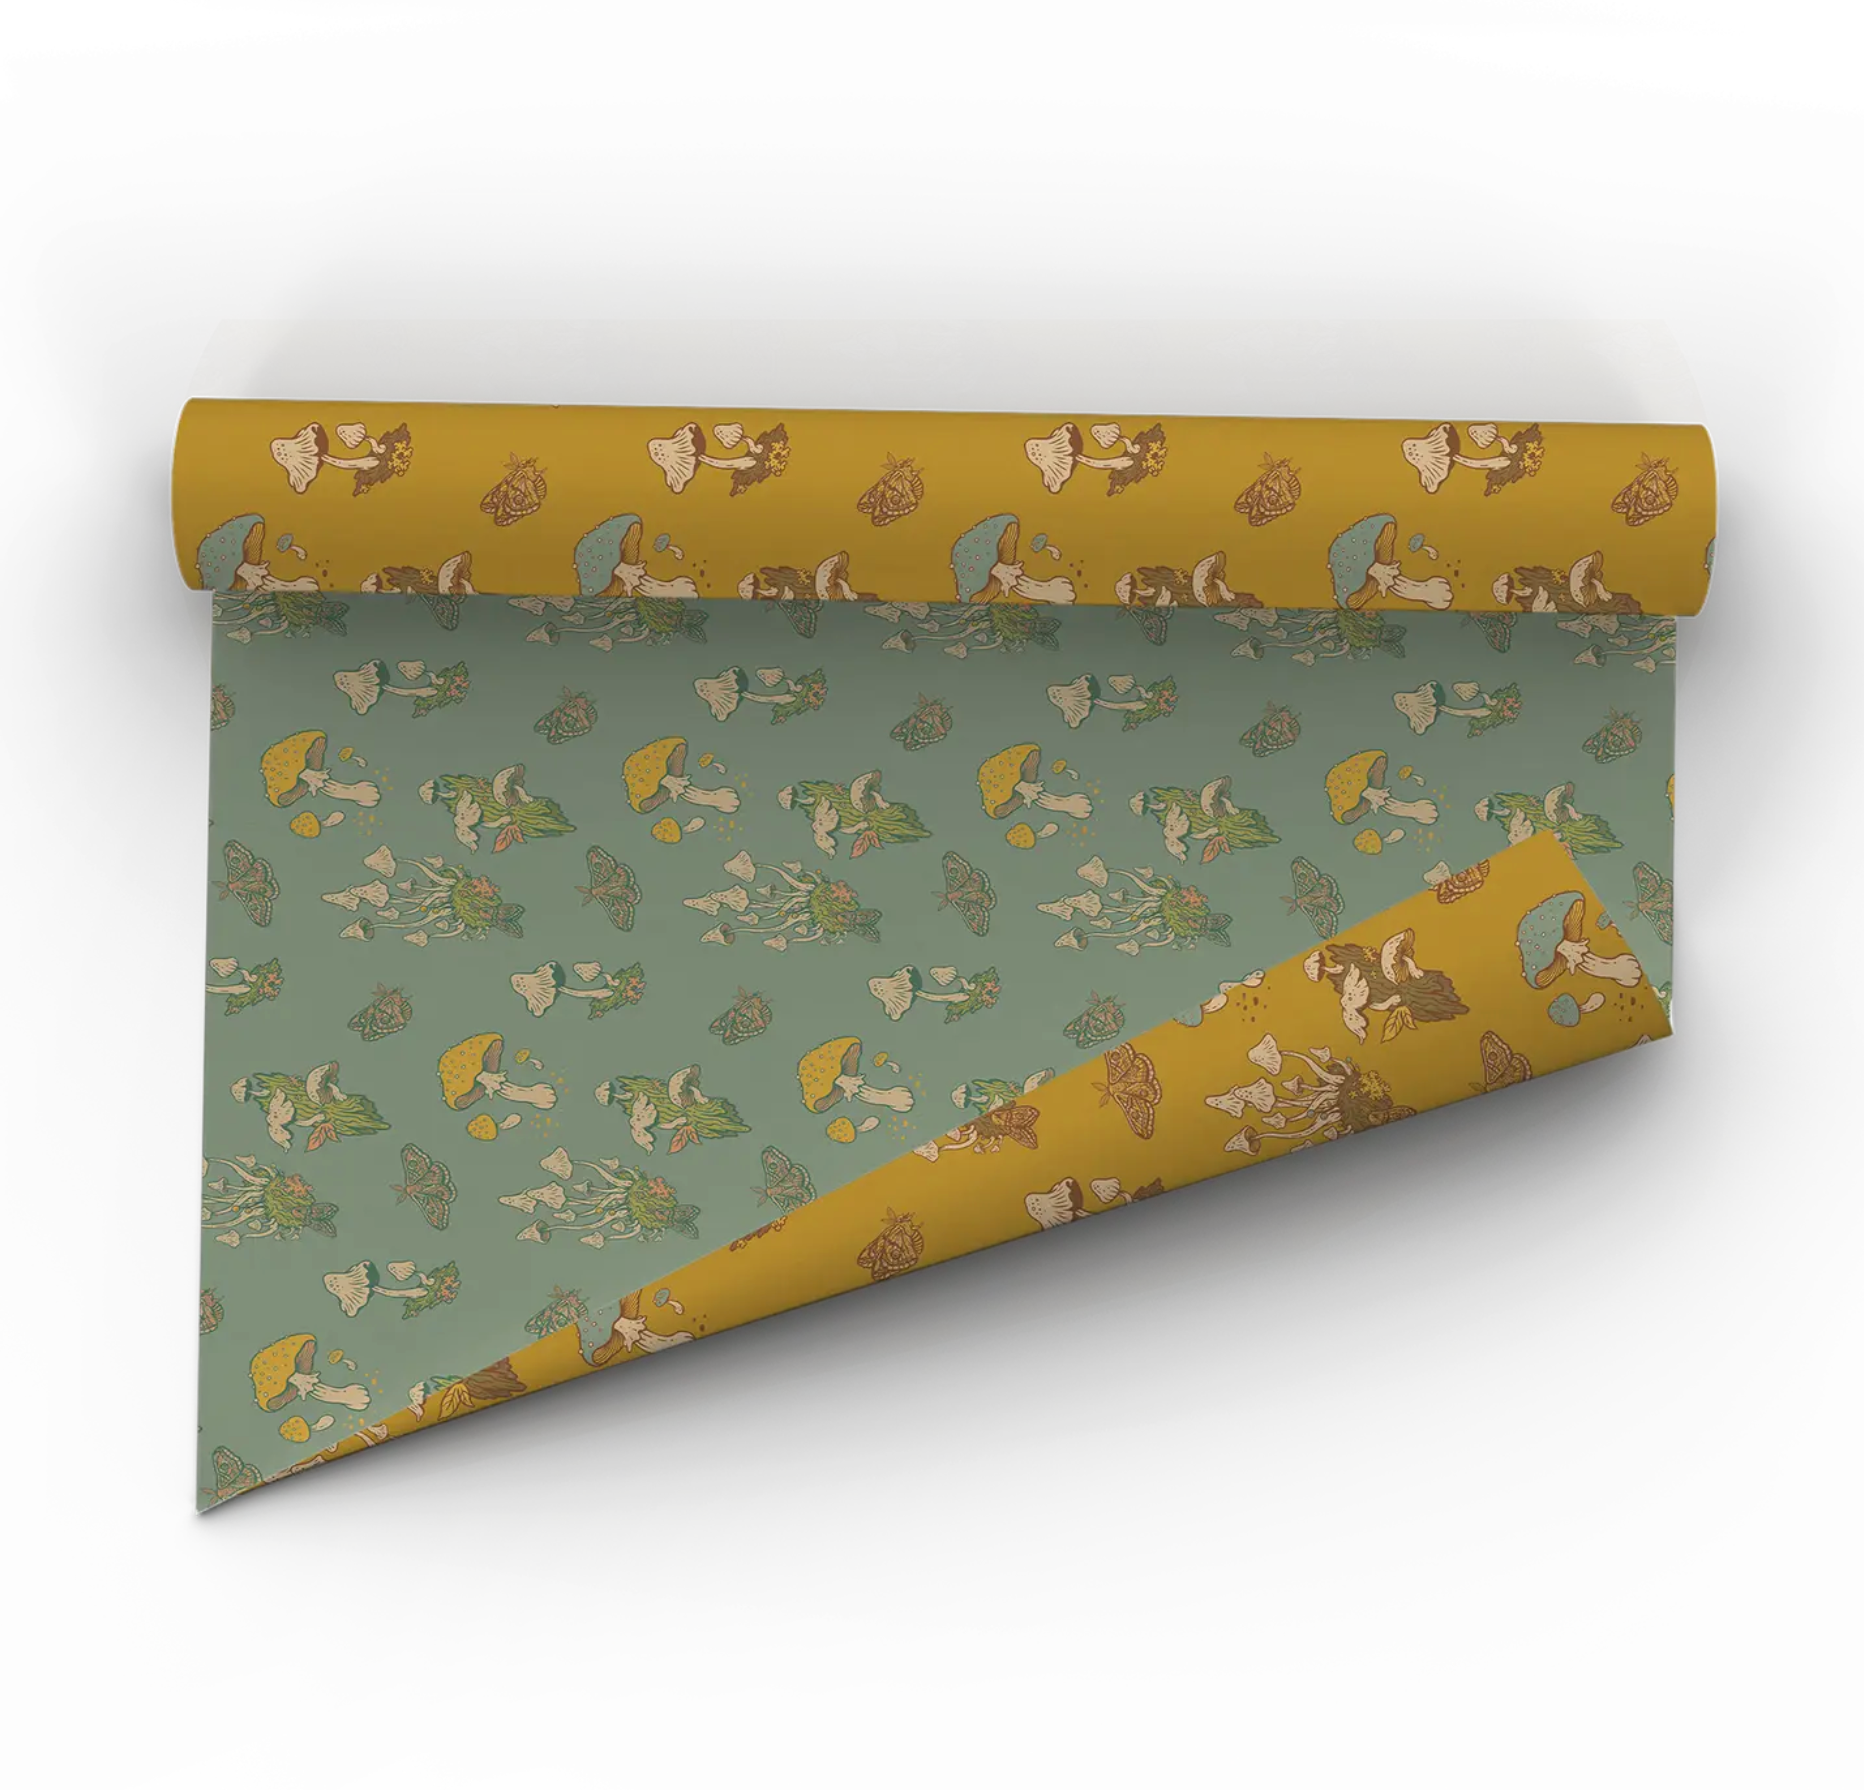 Mushroom Wrapping Paper – The Gamble House Bookstore